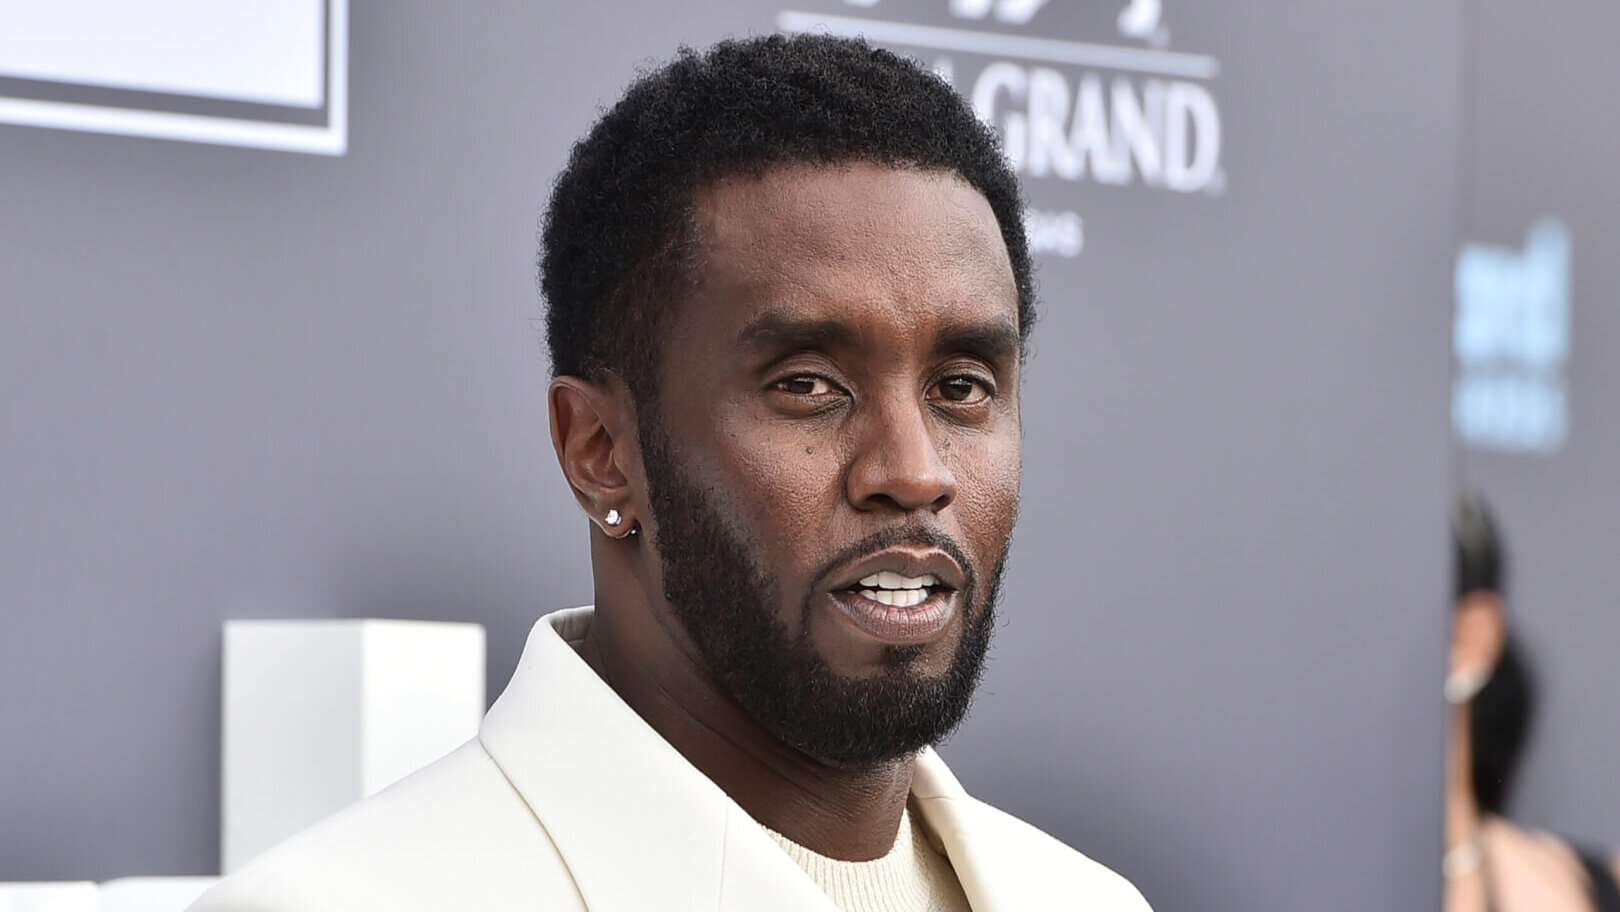 Diddy Faces NYPD Criminal Investigation Over Allegations of Sexual Assault miixtapechiick